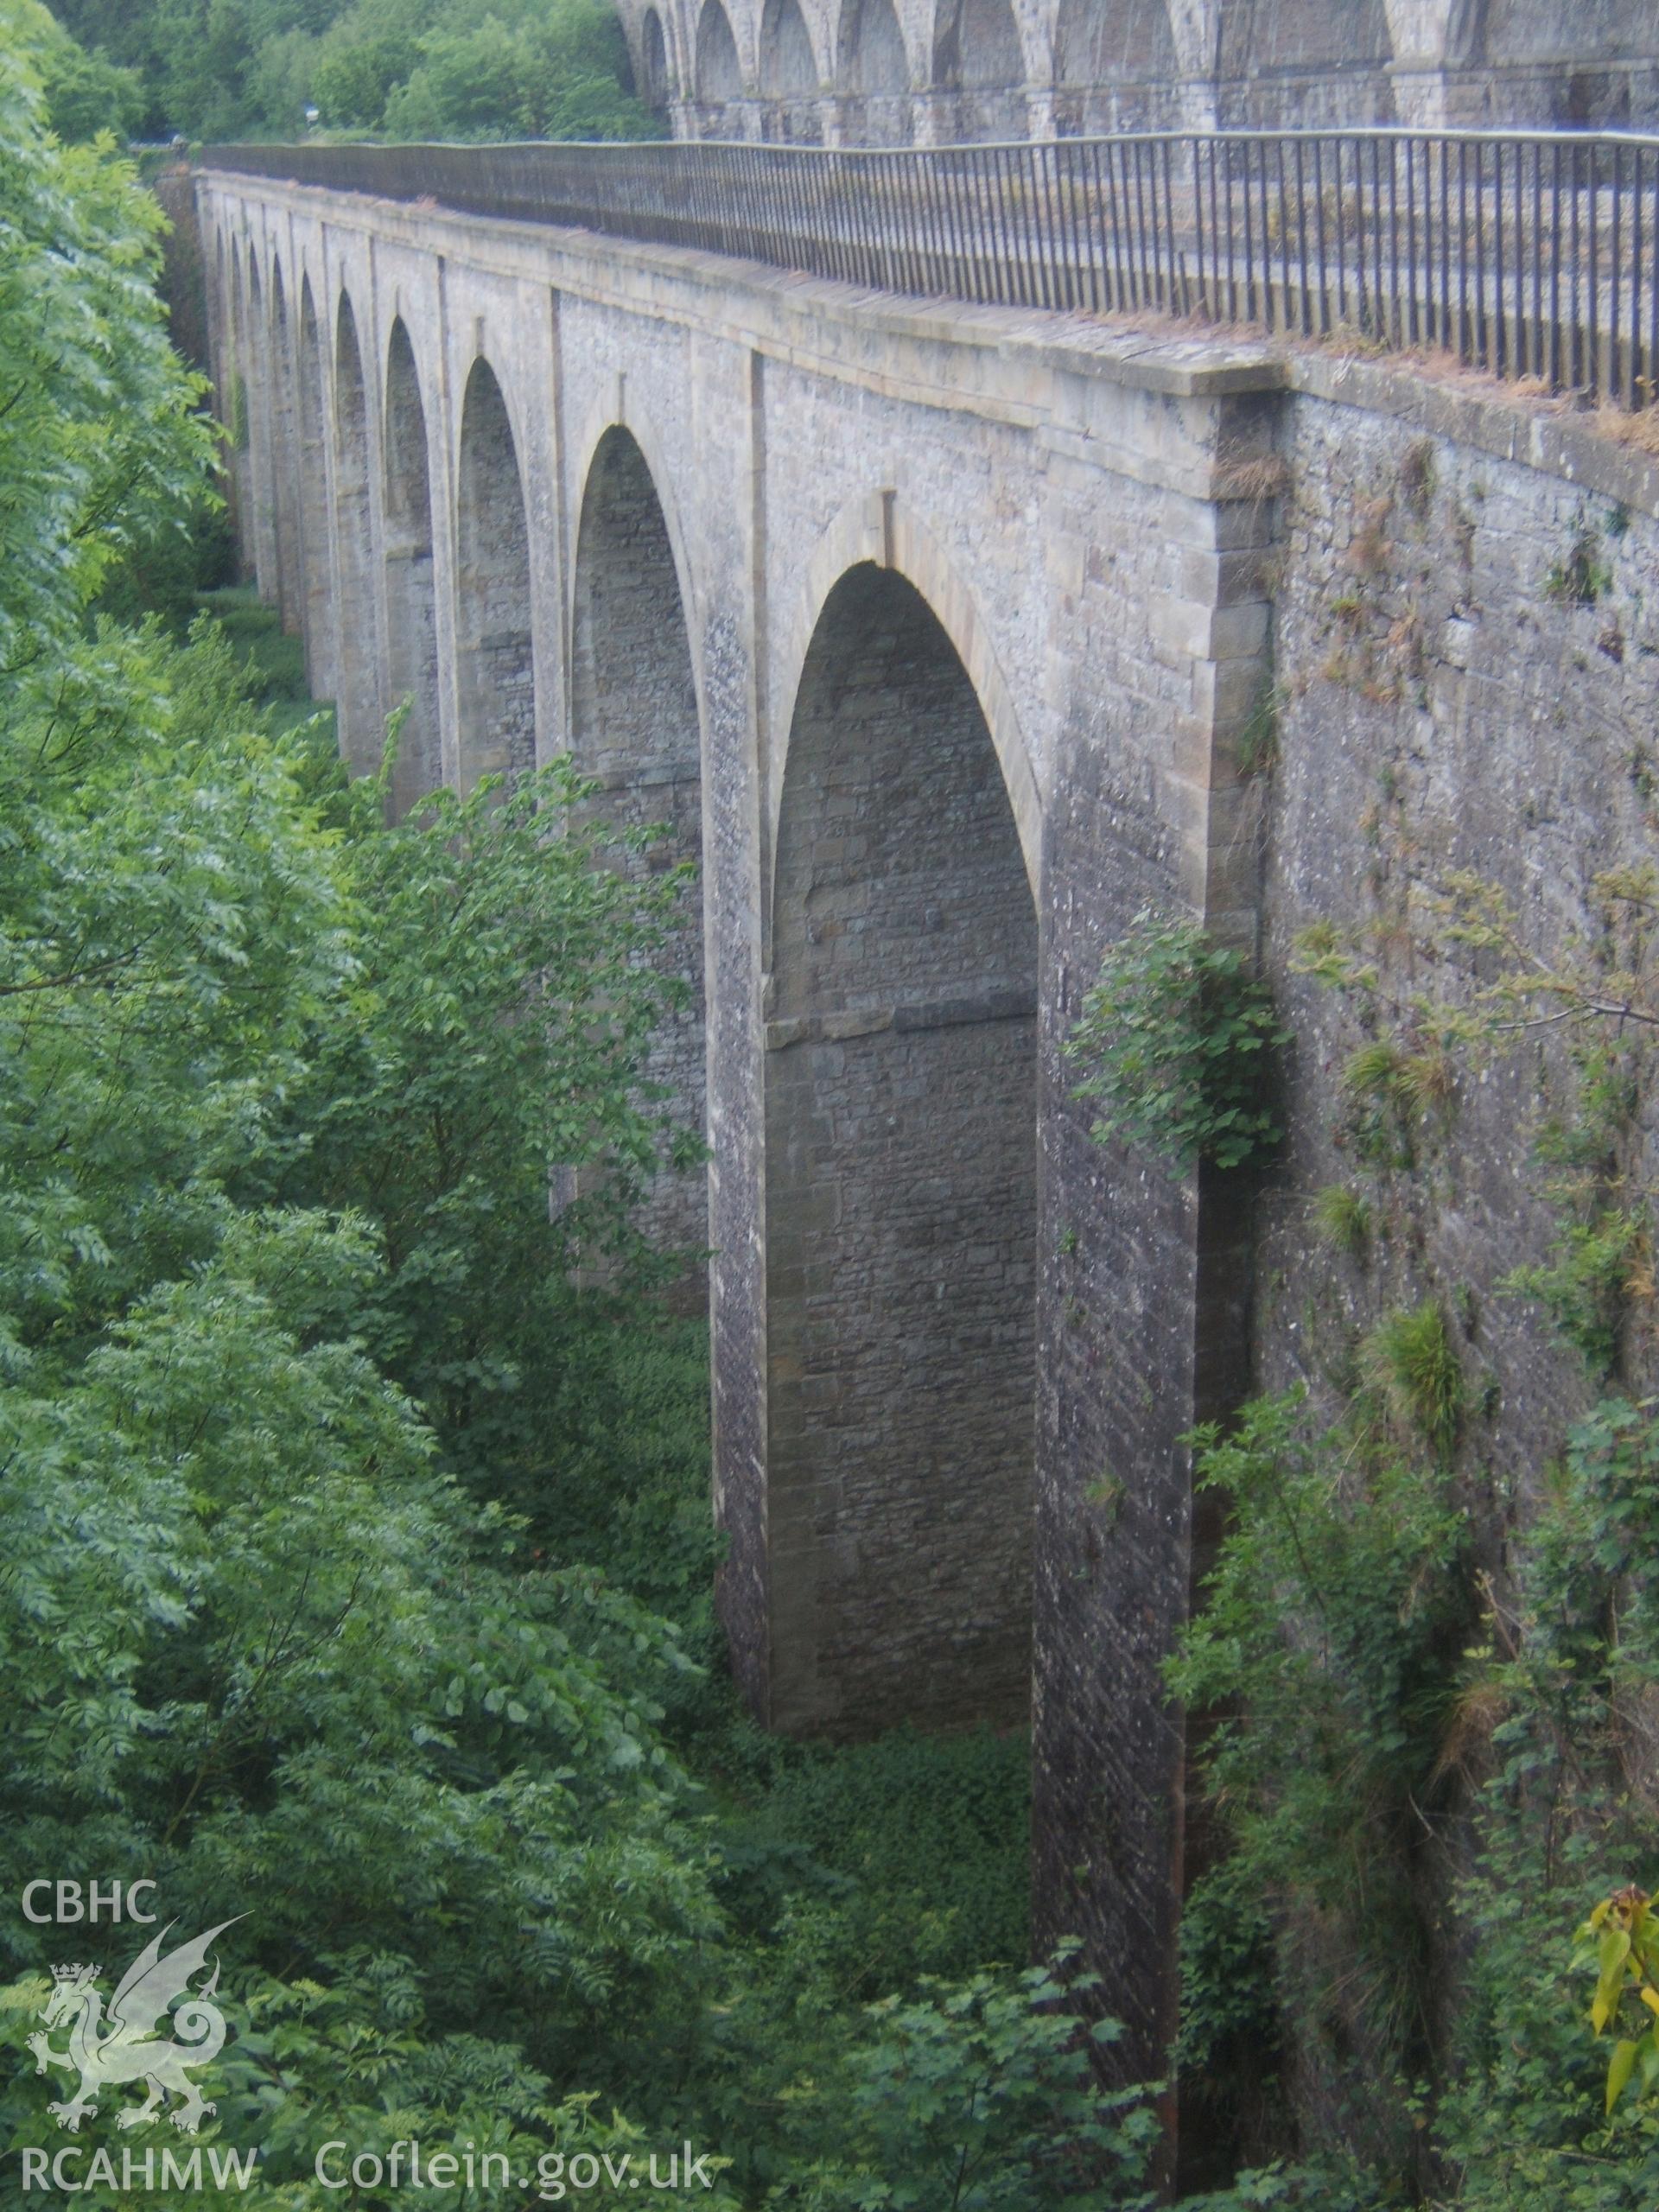 North-east elevation of Chirk Aqueduct.